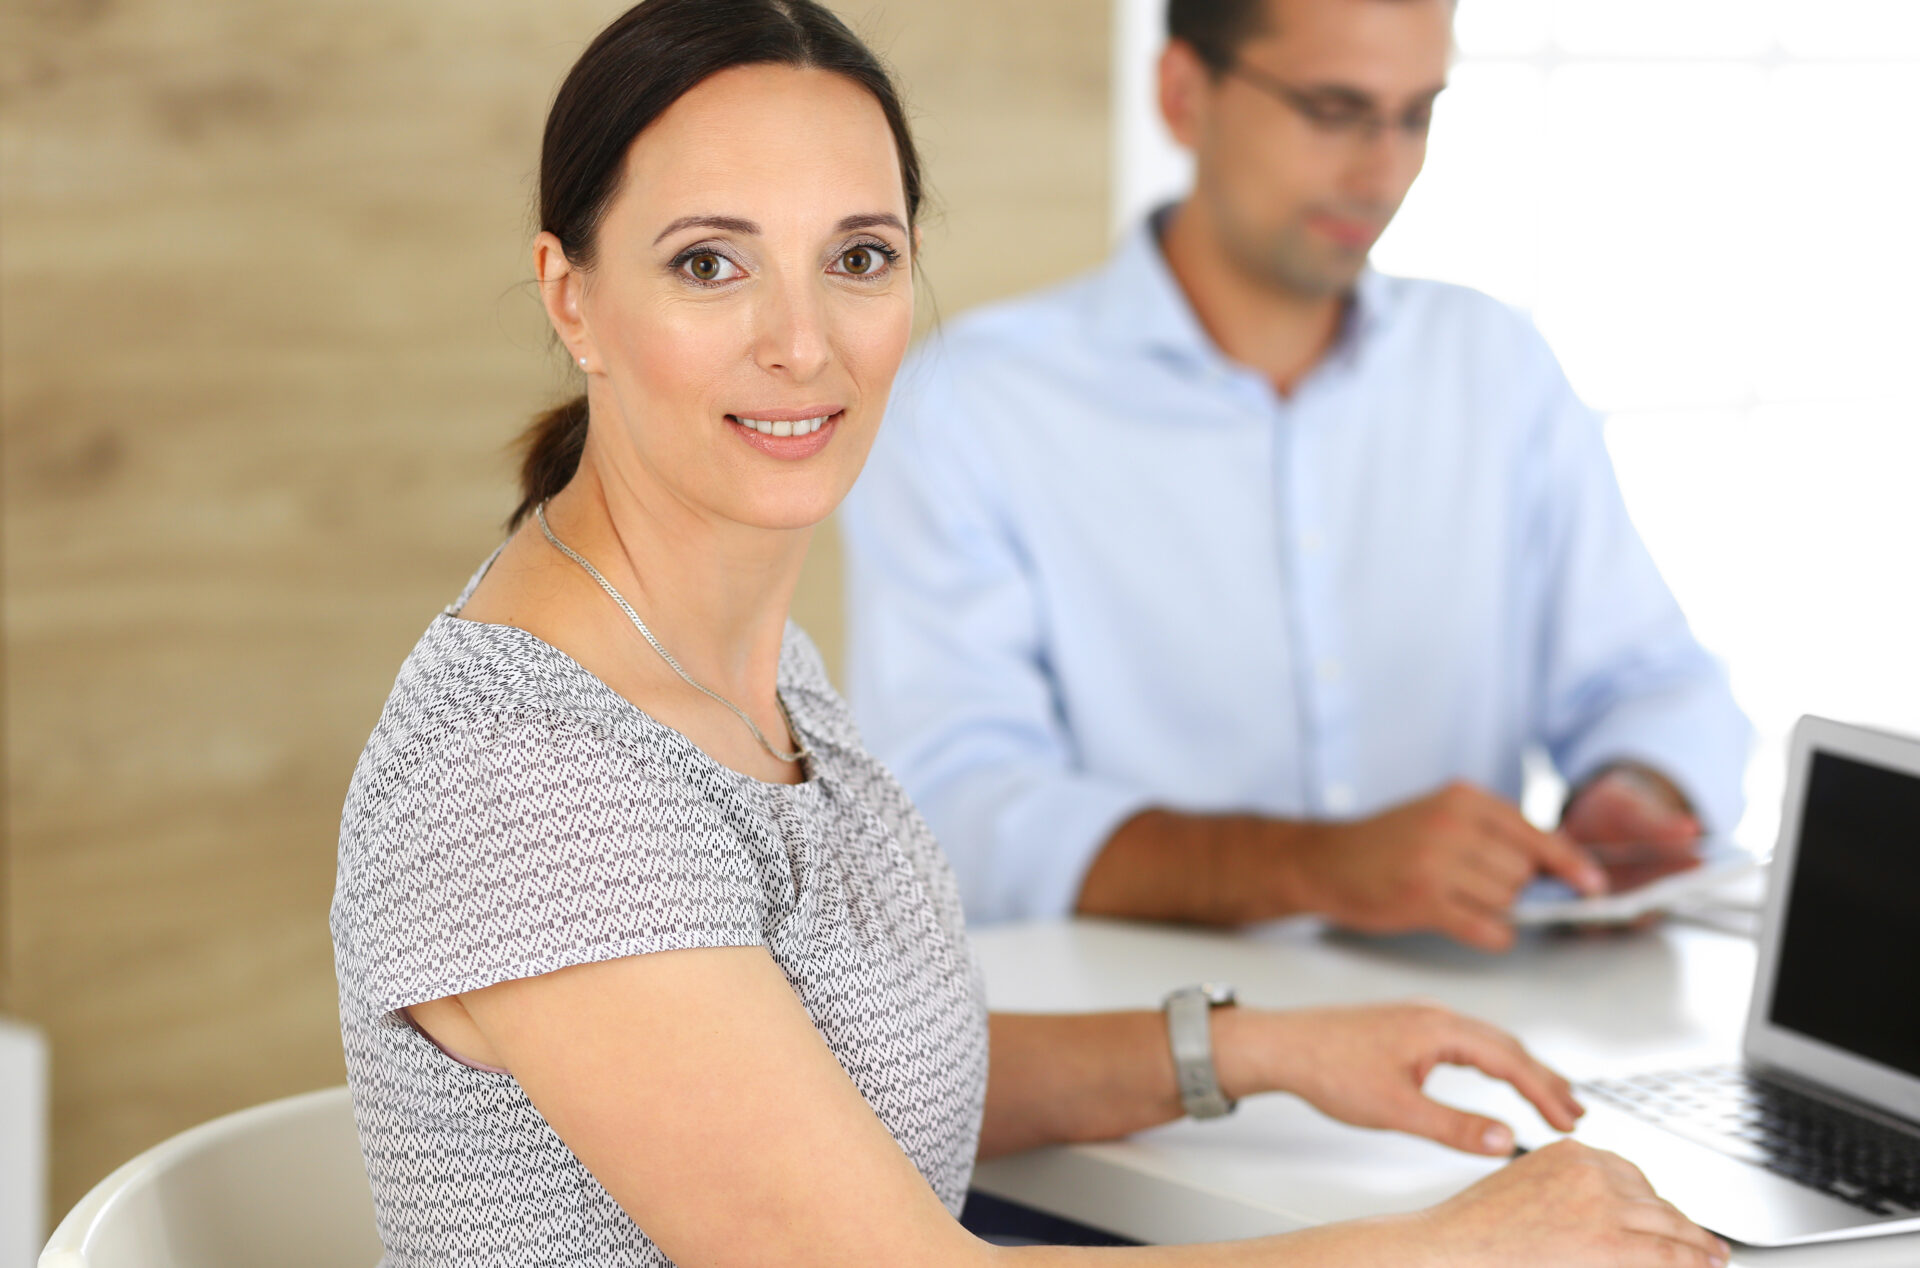 Business woman and businessman discussing questions while using a computer in modern office. Headshot of female hispanic entrepreneur at meeting. Group of diverse people. Teamwork, partnership and business concept.